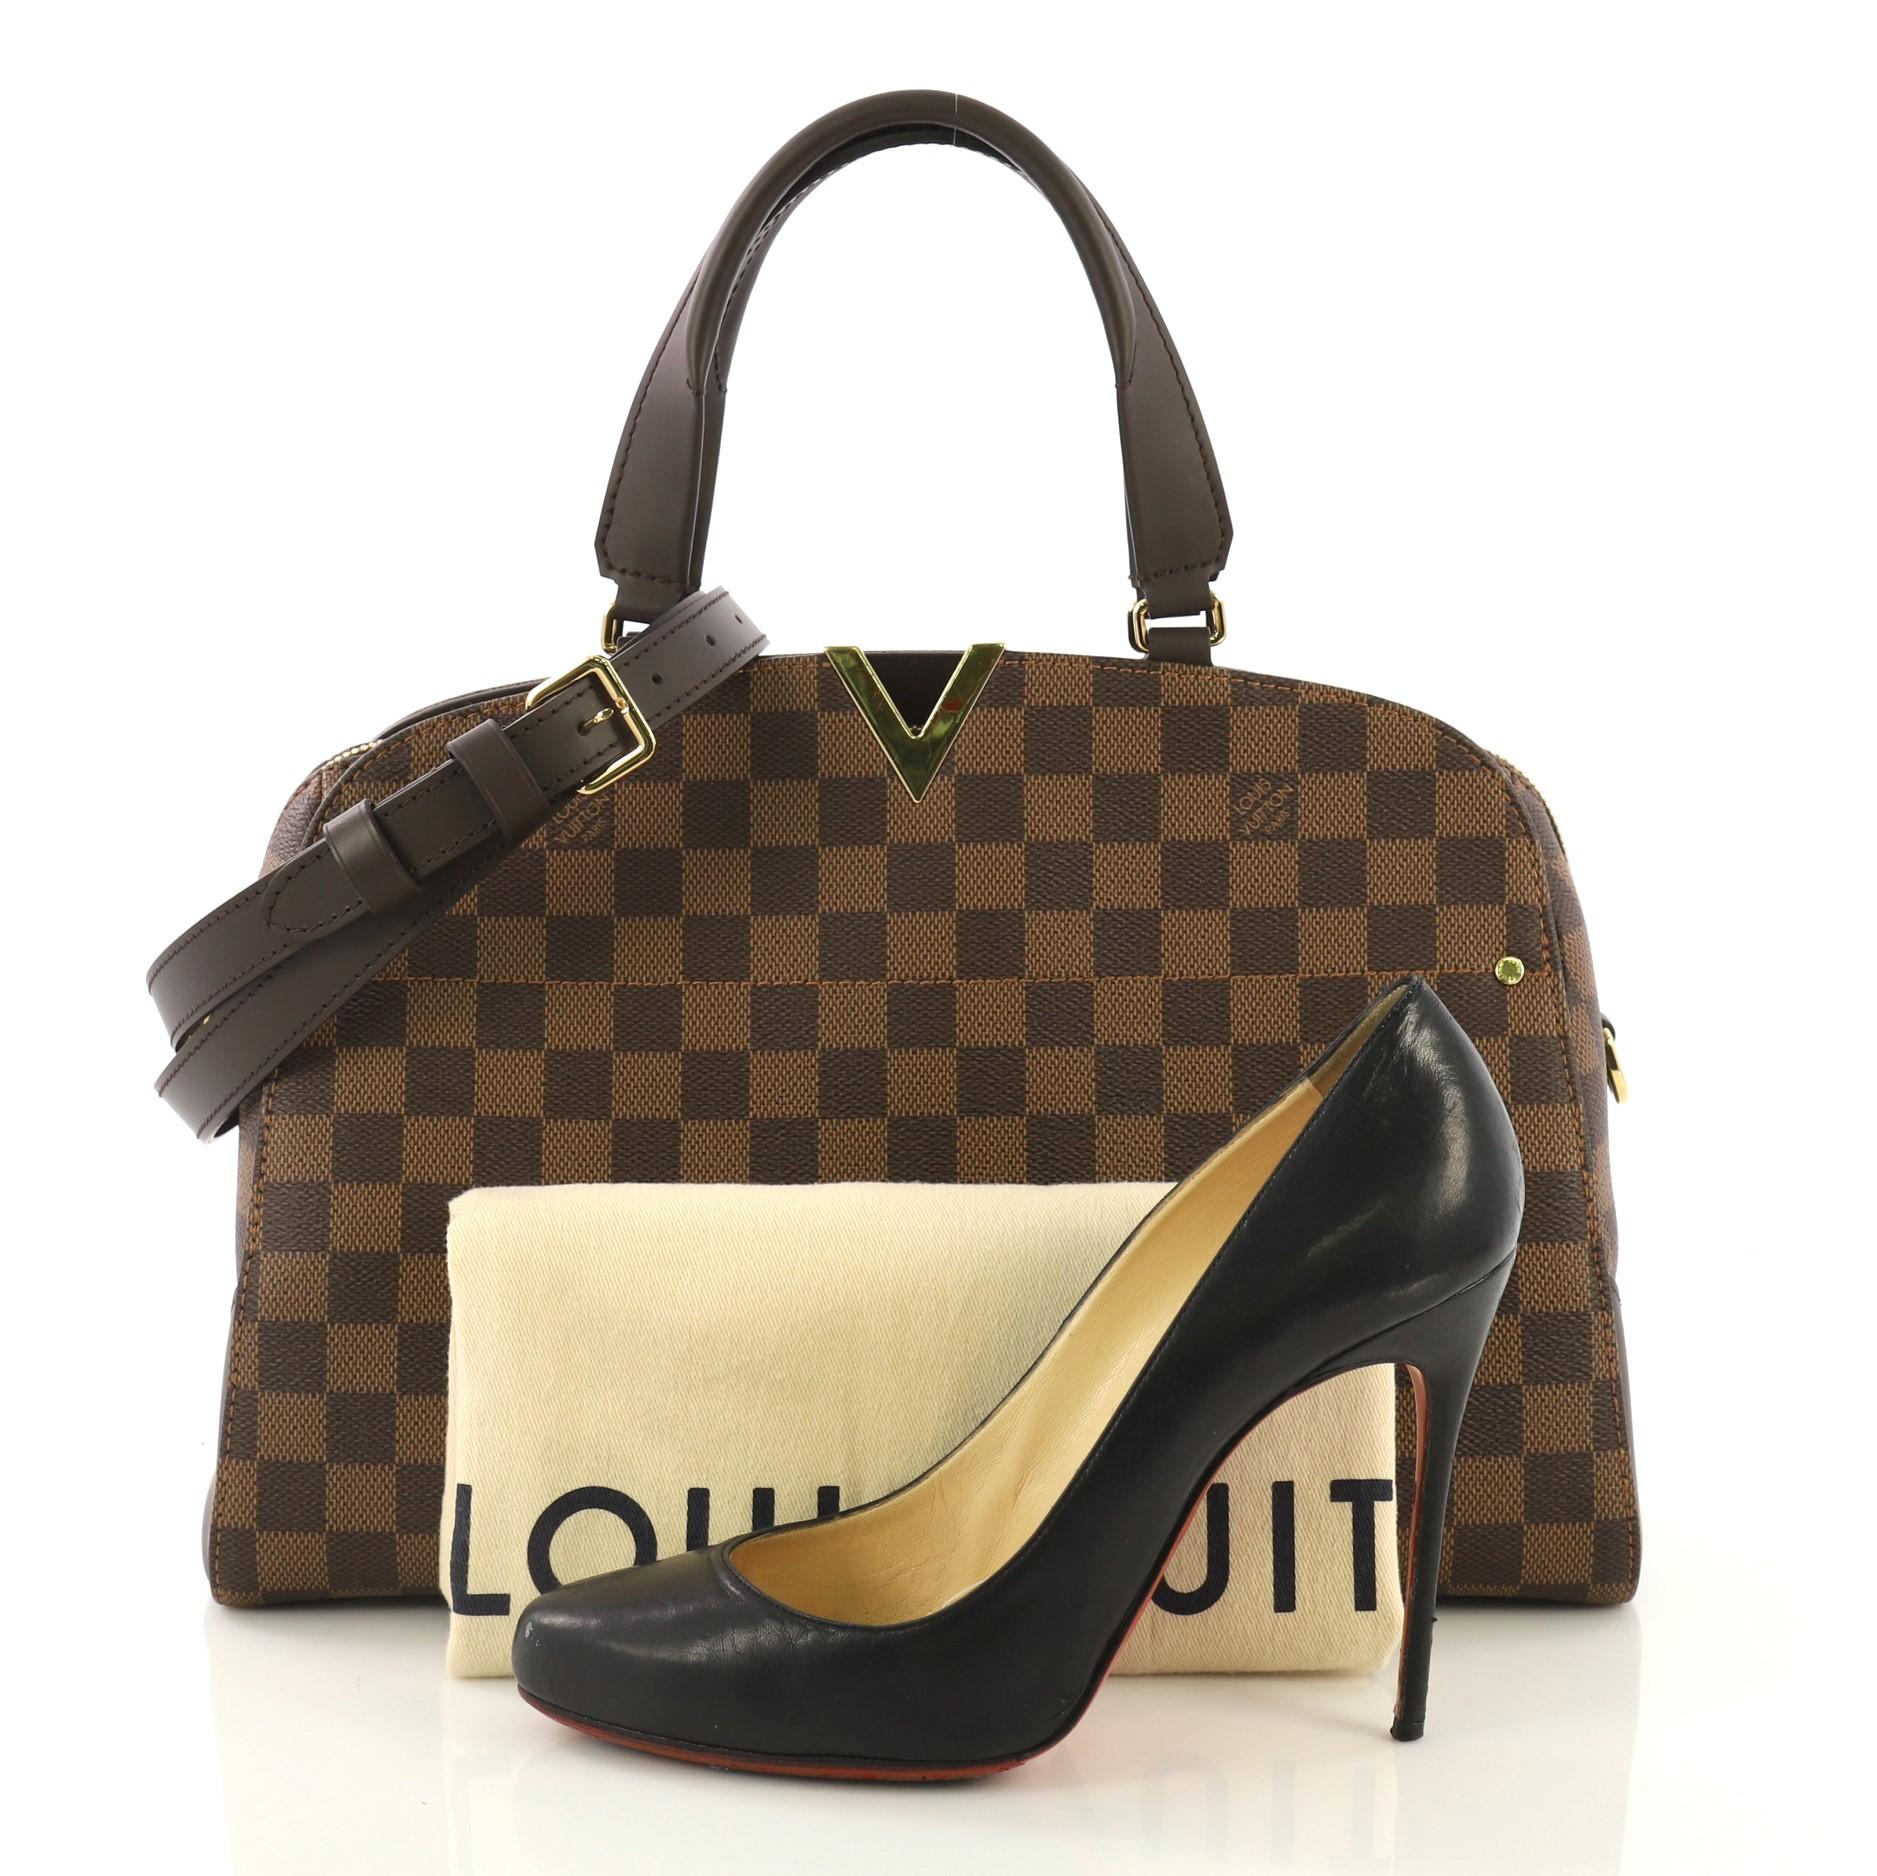 This Louis Vuitton Kensington Bowling Bag Damier, crafted from damier ebene coated canvas, features dual leather handles, brown leather trim, cut out V hardware on its top center, and gold-tone hardware. Its zip closure opens to a blush pink